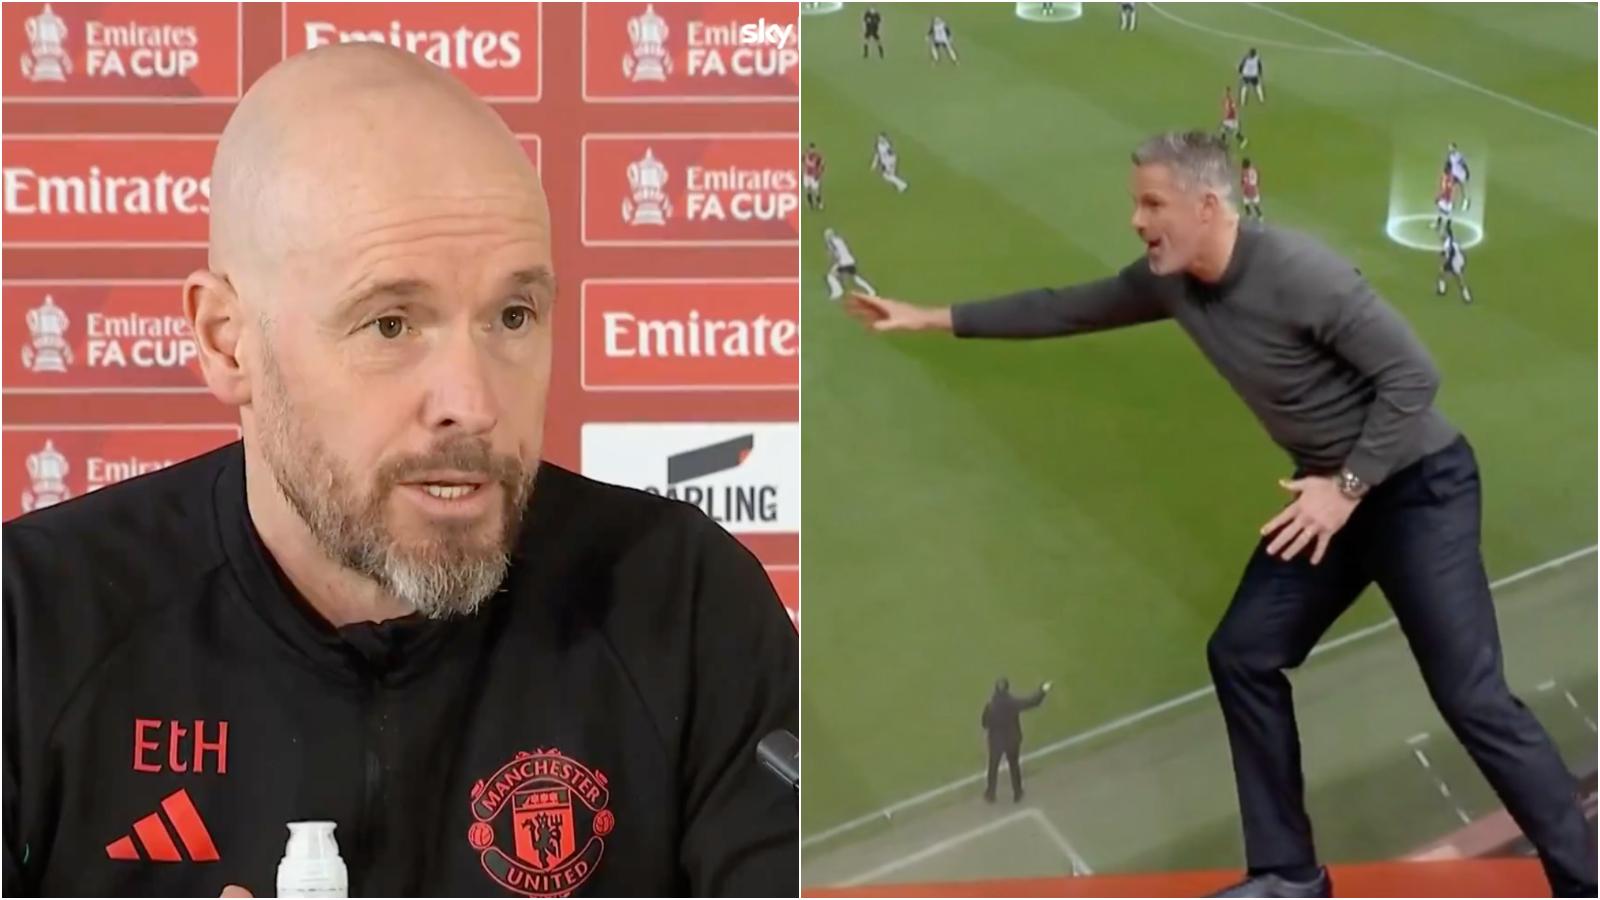 Ten Hag responded to Carragher's criticism